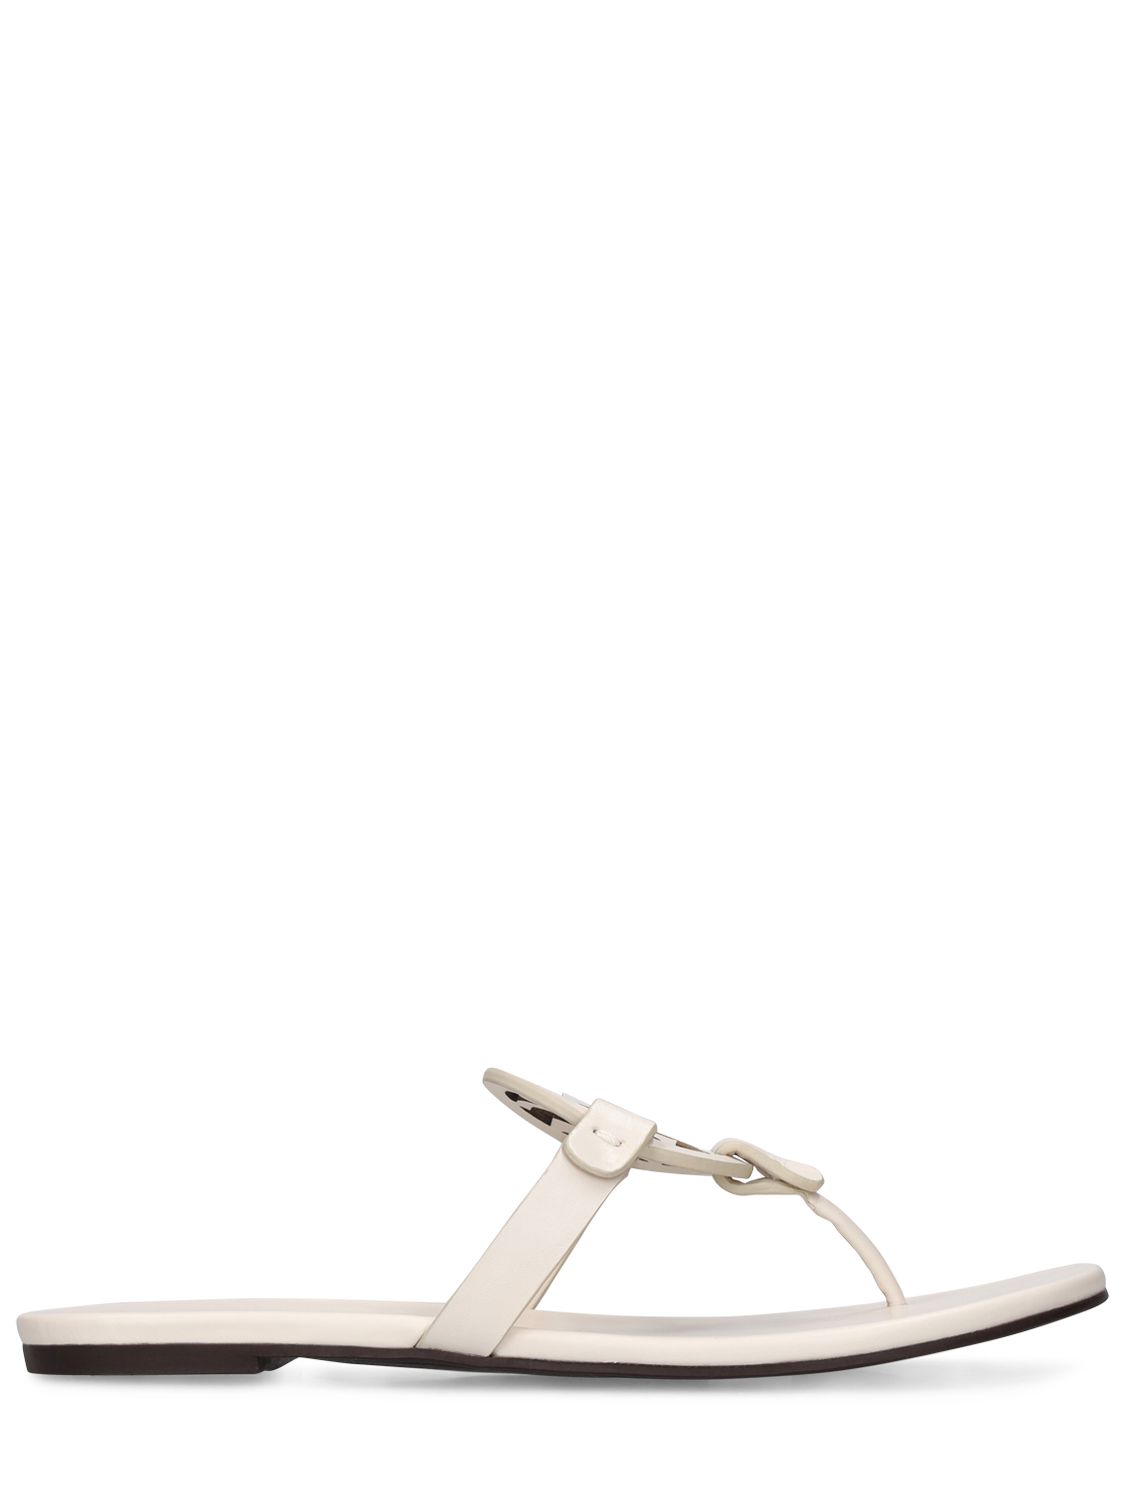 Tory Burch 10mm Miller Leather Sandals In Ivory